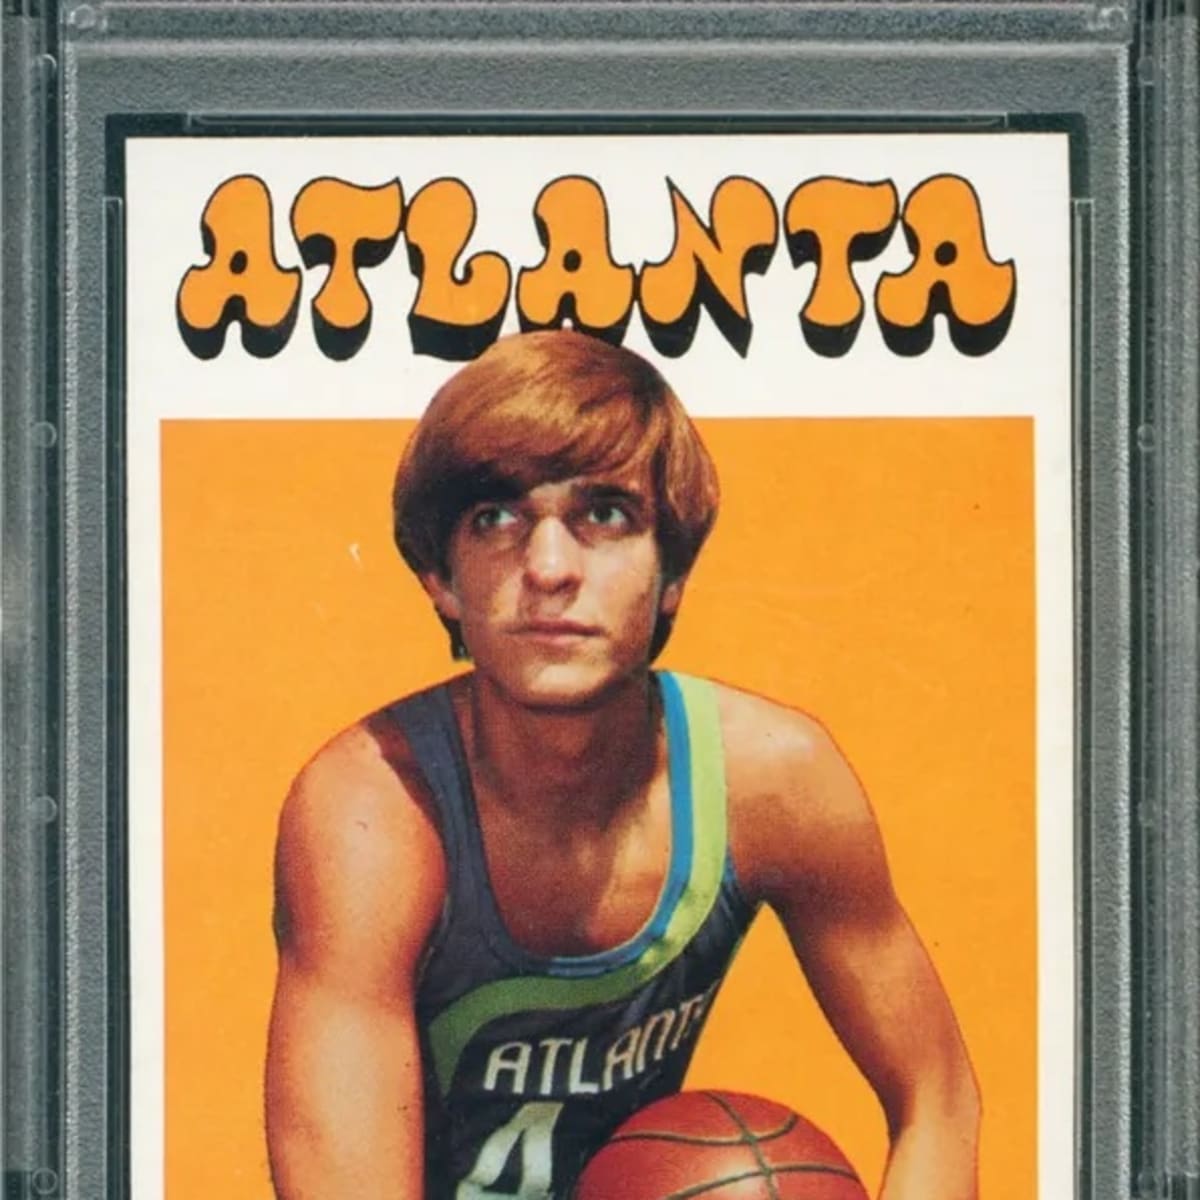 No. 4: The point has been made for Pete Maravich as college